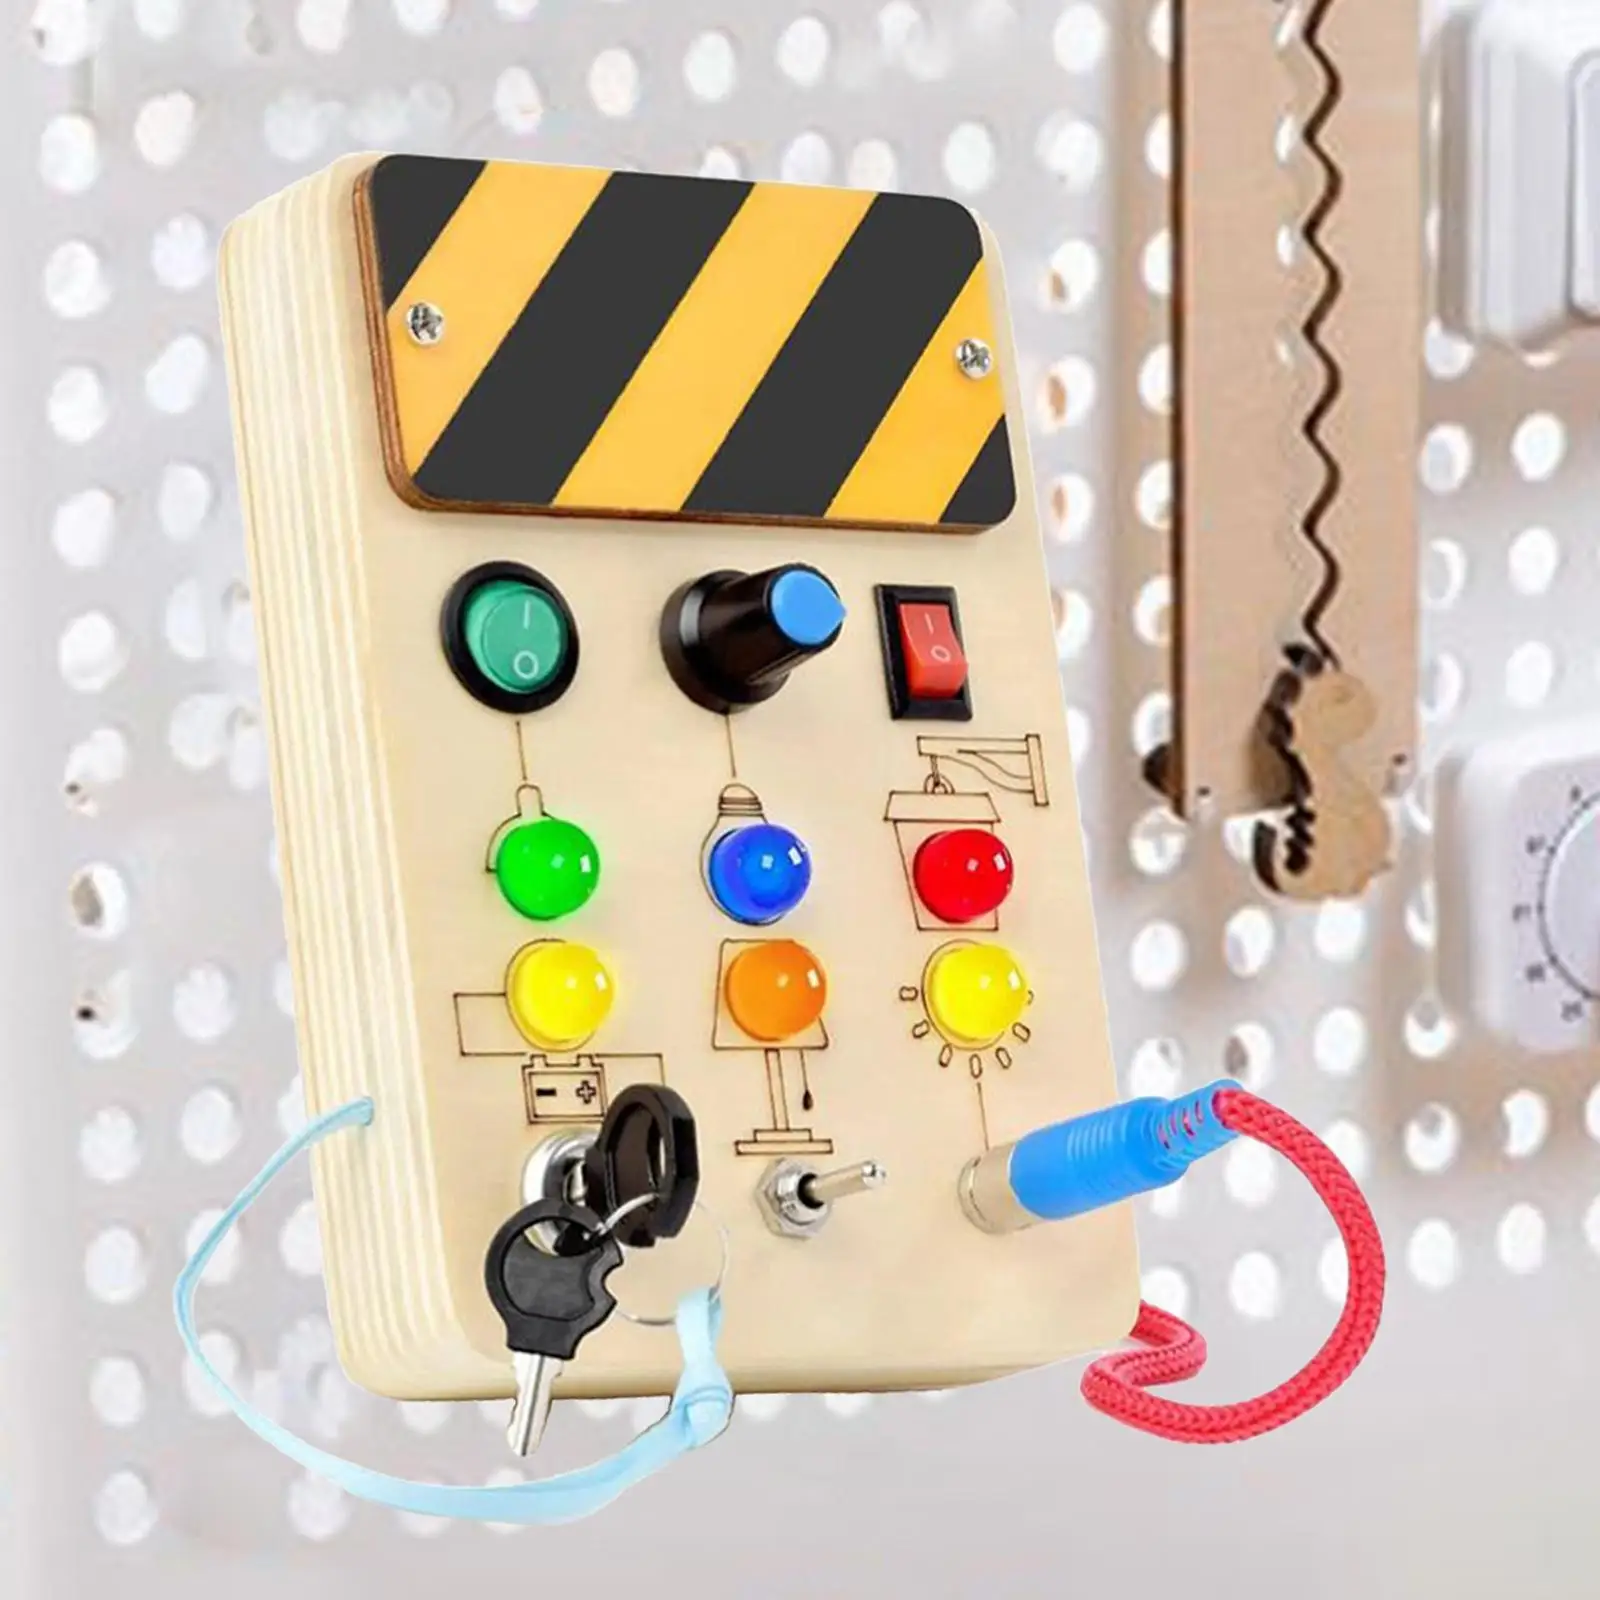 Light switch toy Developmental Toy Toddler Busy Board for Indoor Play Game